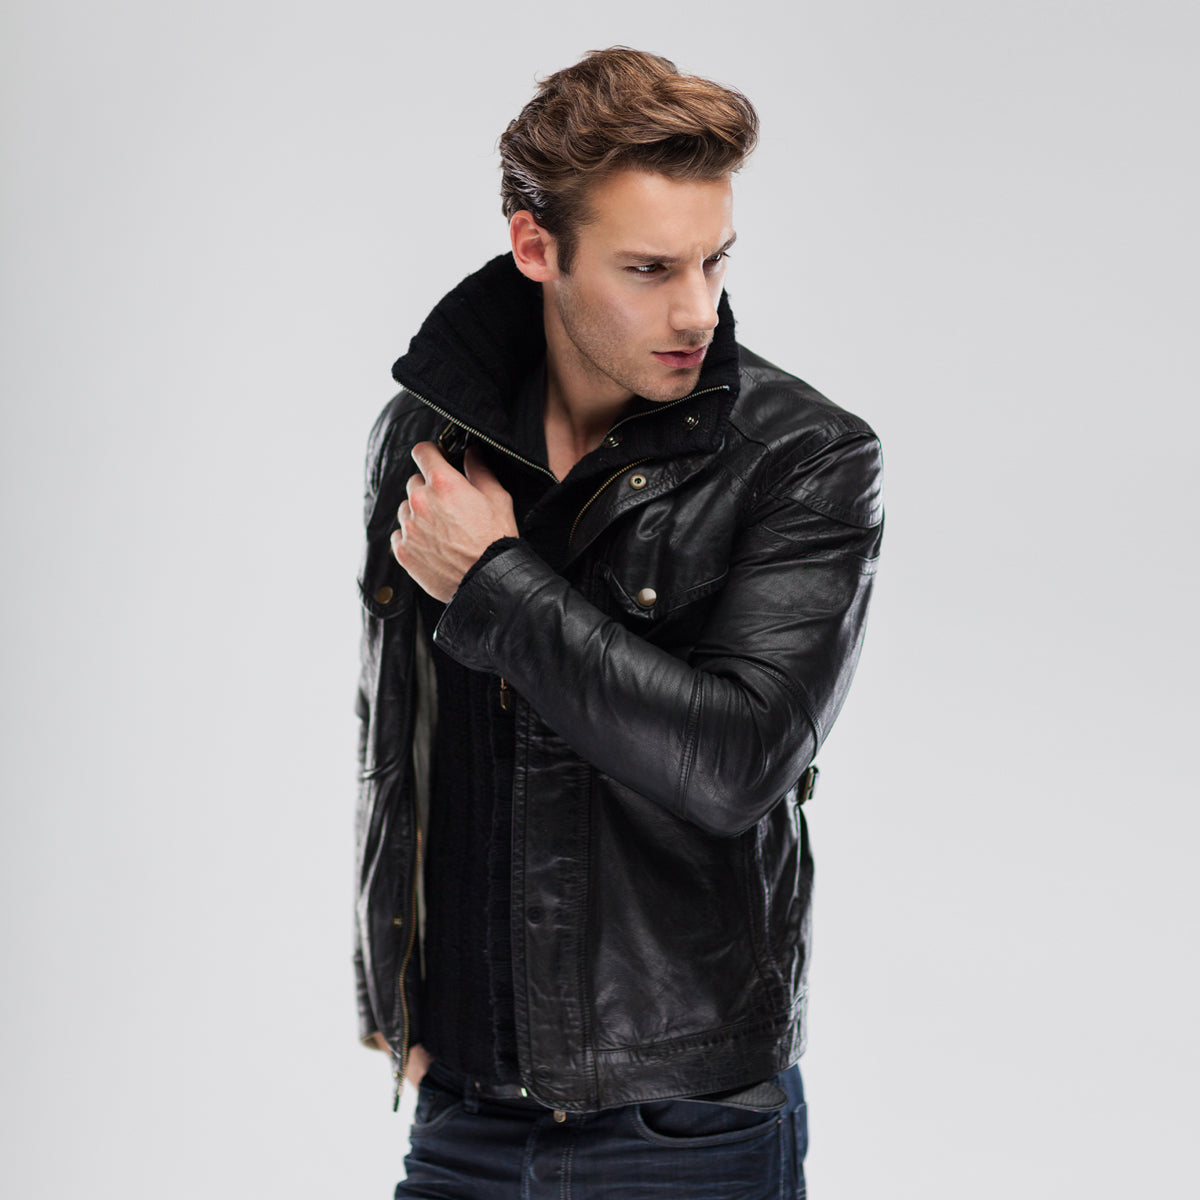 Men's Leather Jackets | Real Leather Jackets For Men in UK | LLD Original